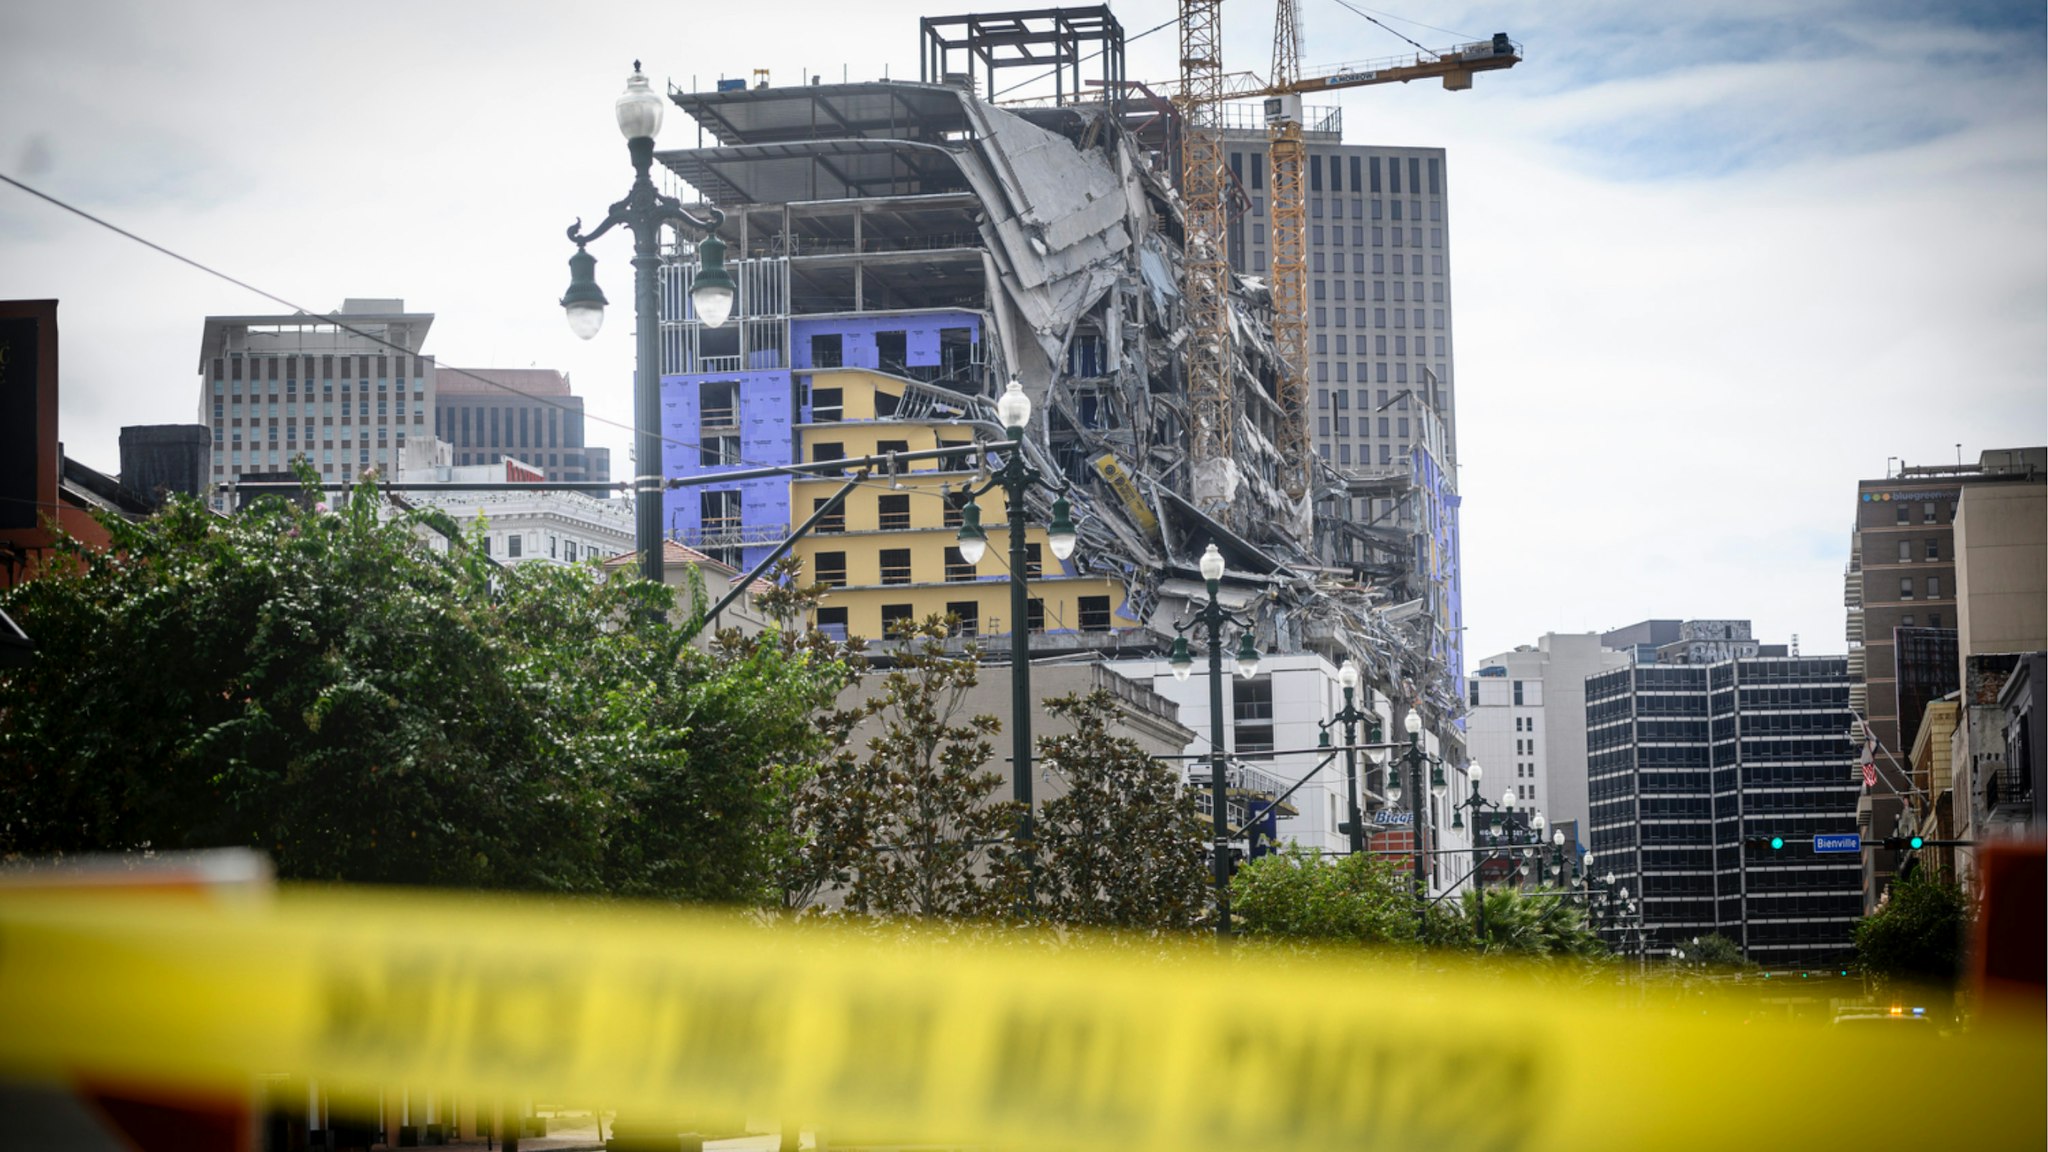 The Hard Rock Hotel partially collapsed onto Canal Street downtown New Orleans, Louisiana on October 12, 2019. - One person died and at least 18 others were injured Saturday when the top floors of a New Orleans hotel that was under construction collapsed, officials said.